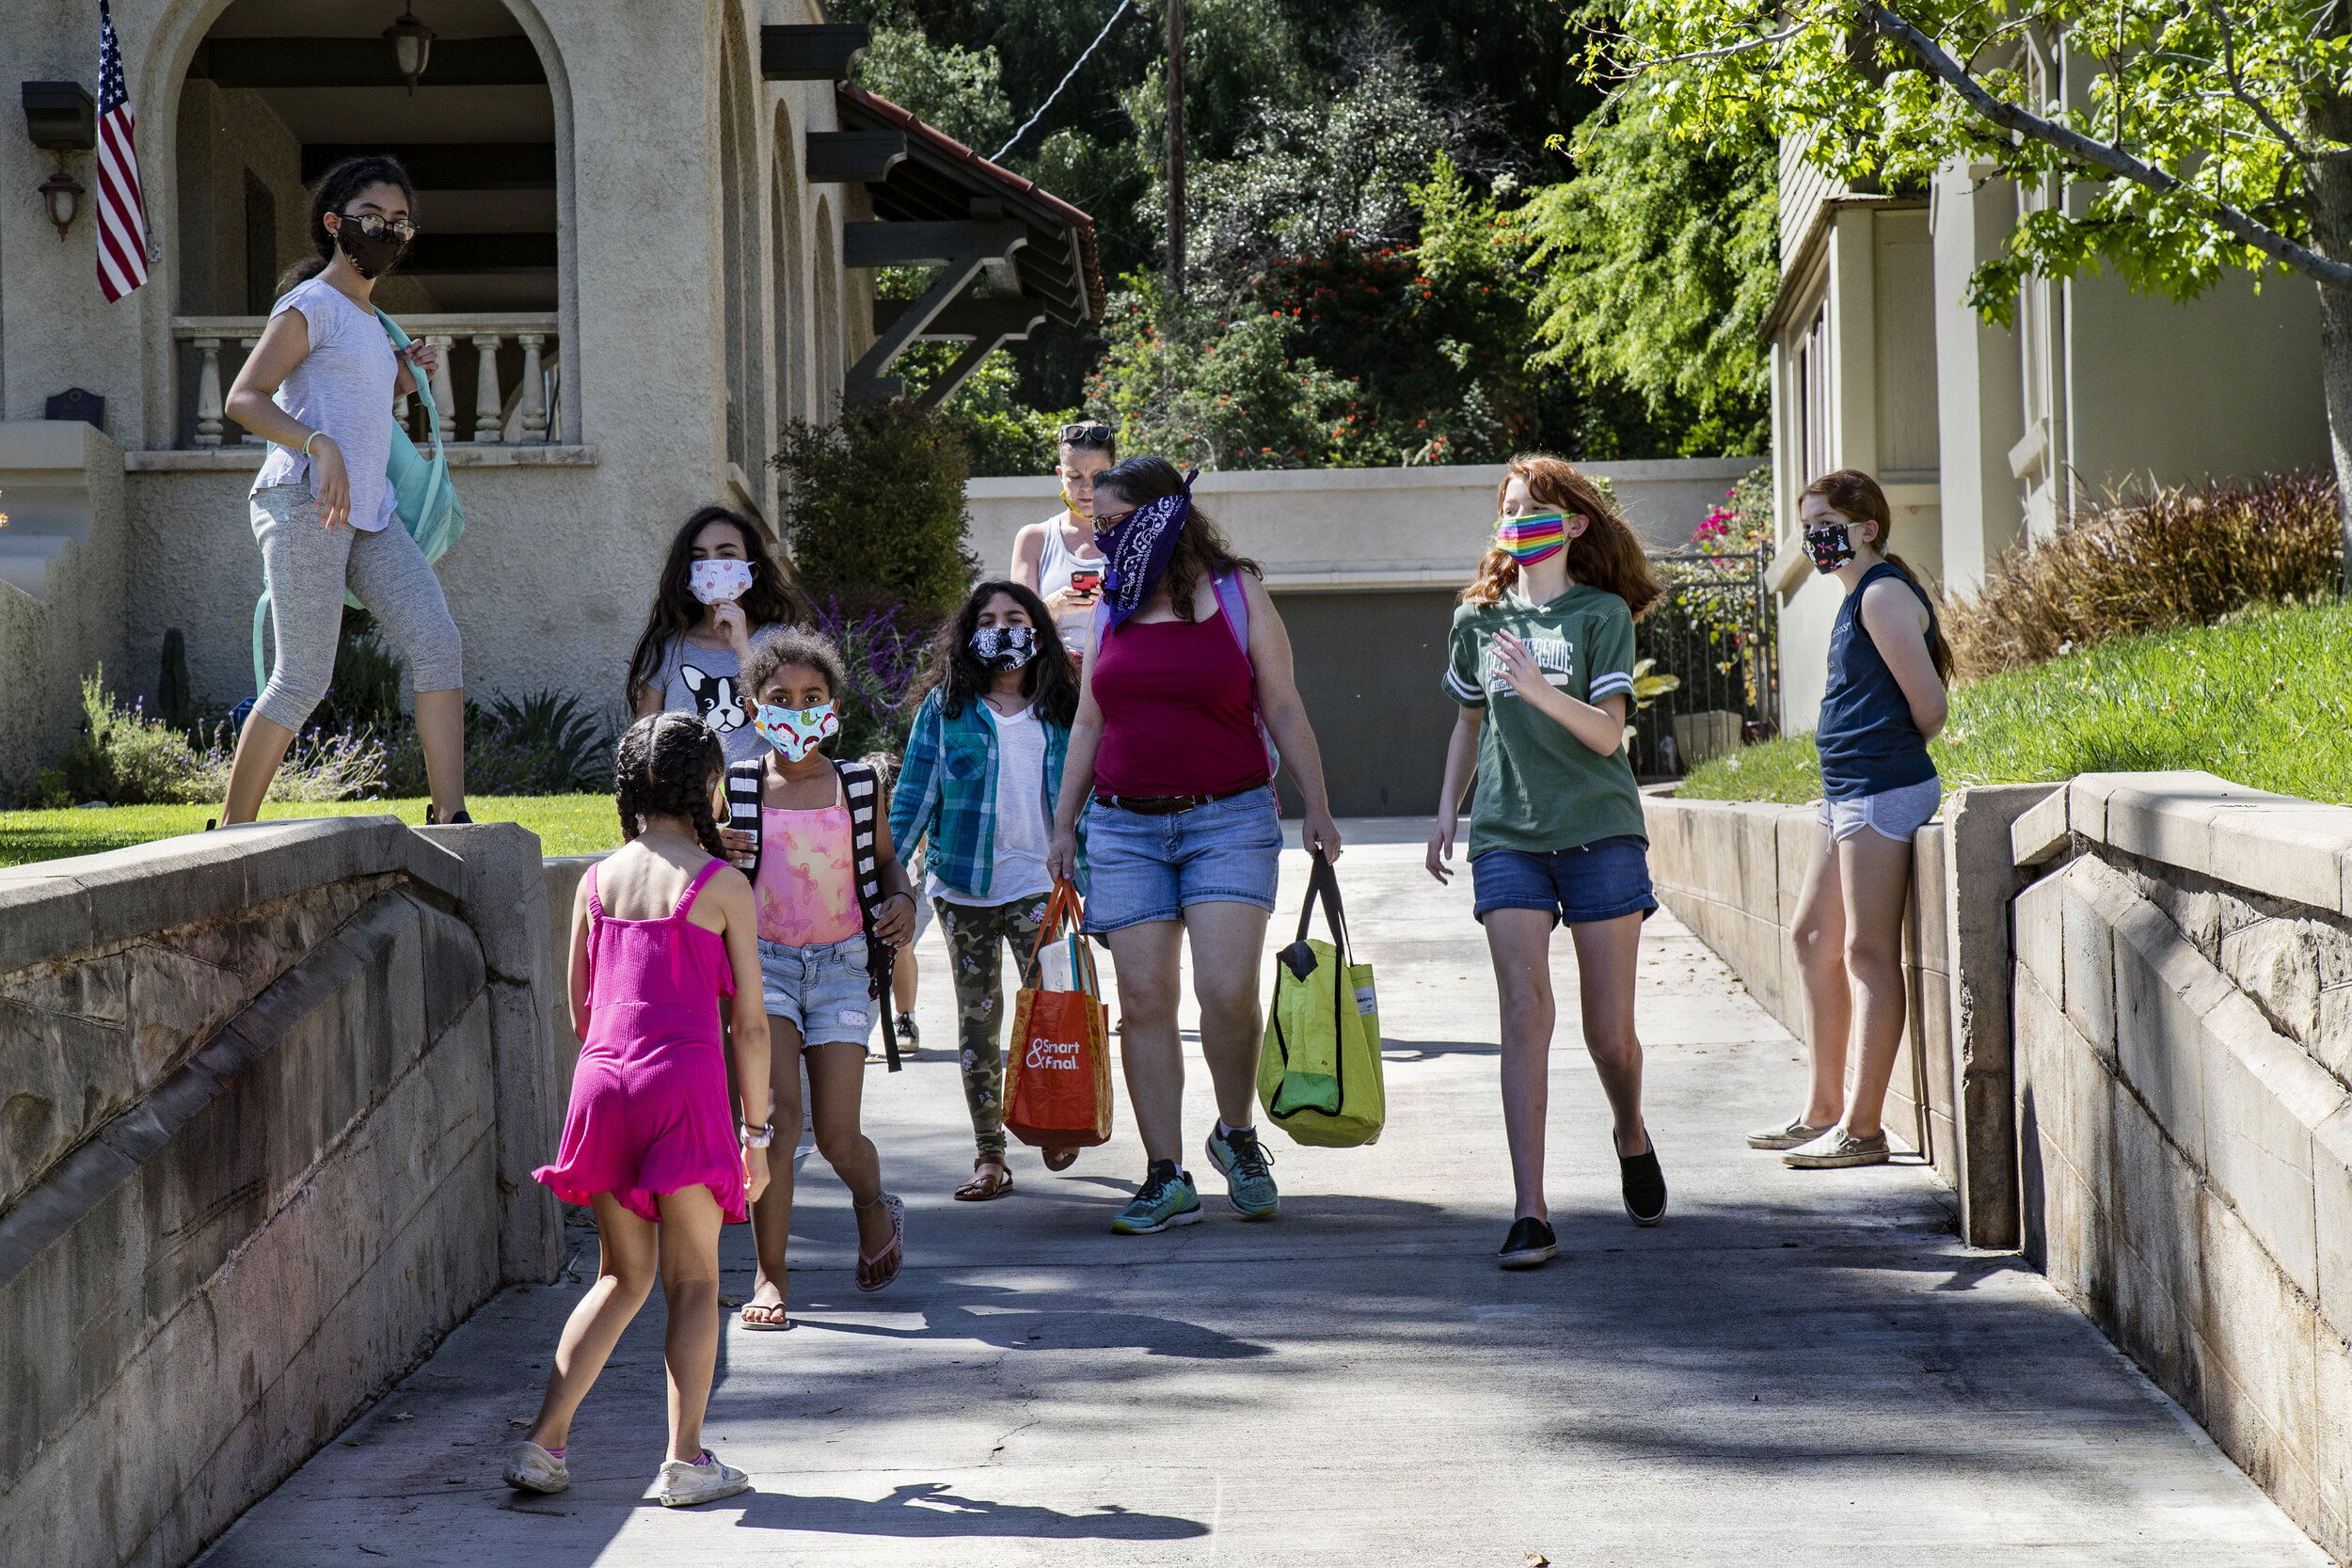  RIVERSIDE, CA- APRIL 23, 2020: Students and parents of “Brothbush Academy” walk from the Bristow’s to the Furbush’s for a cooking  class during home school in the midst of the coronavirus pandemic on April 21, 2020 in Riverside, California. The Bris